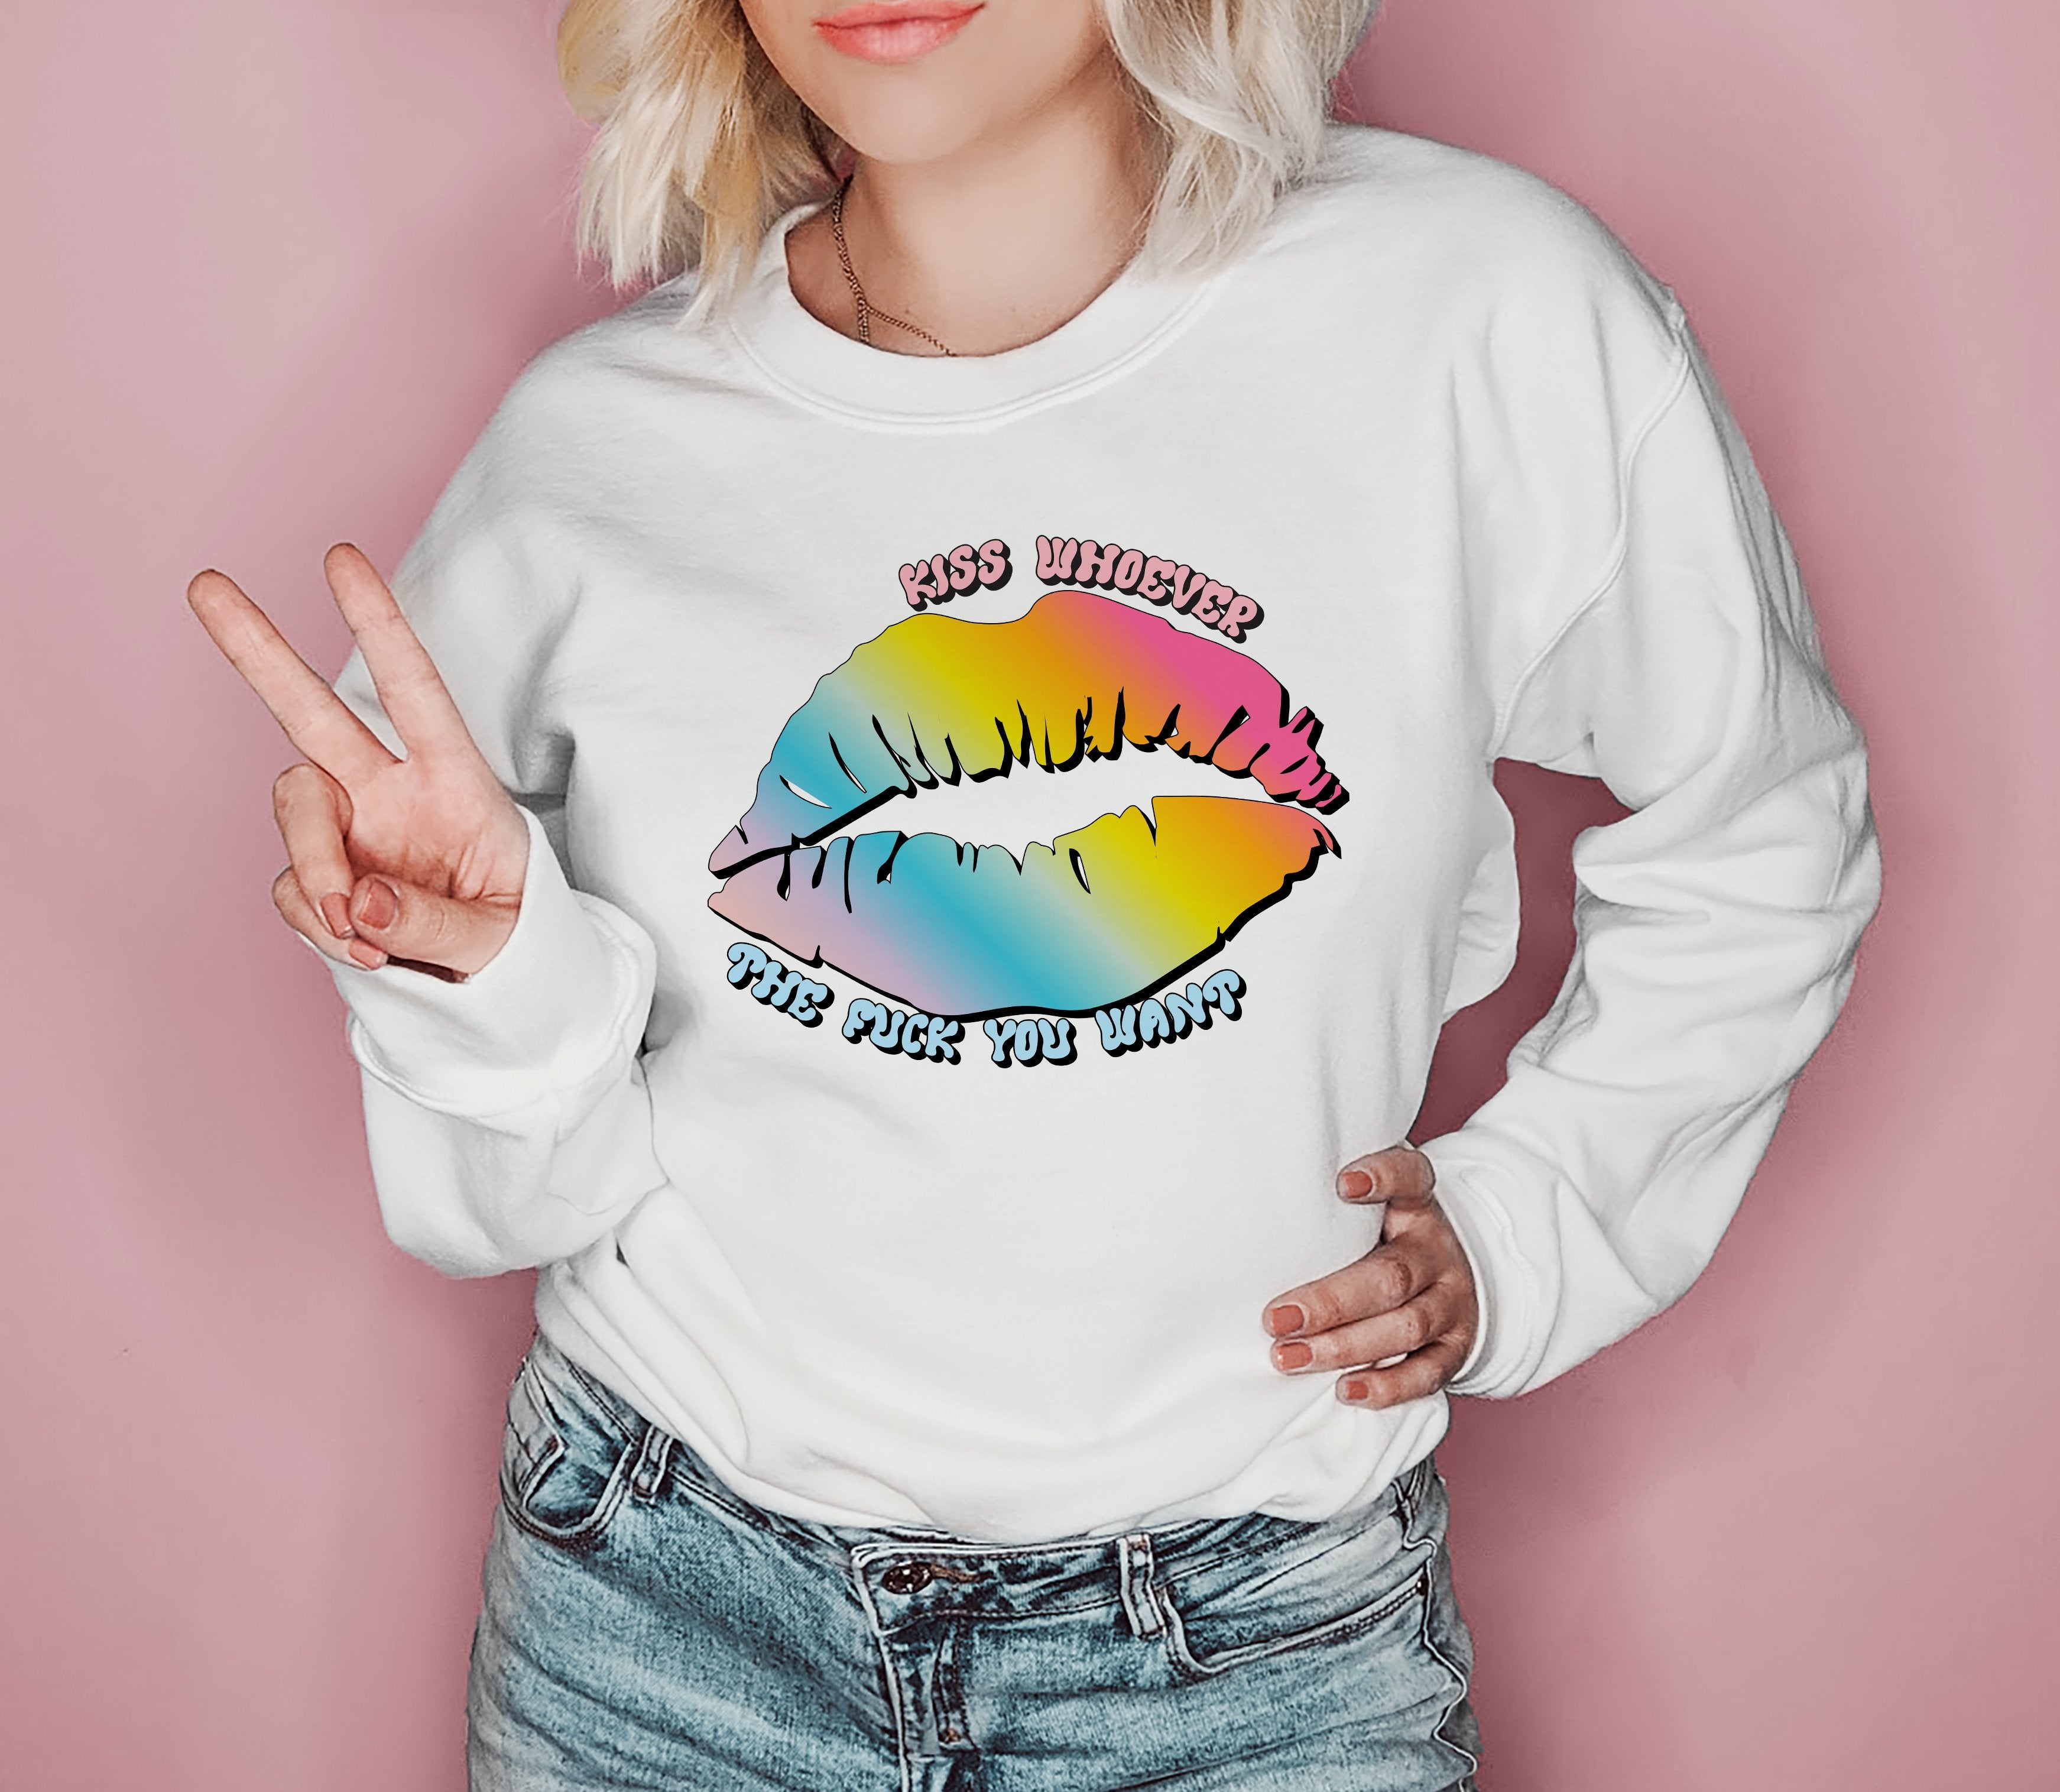 White sweatshirt with rainbow lips saying kiss whoever the fuck you want - HighCiti